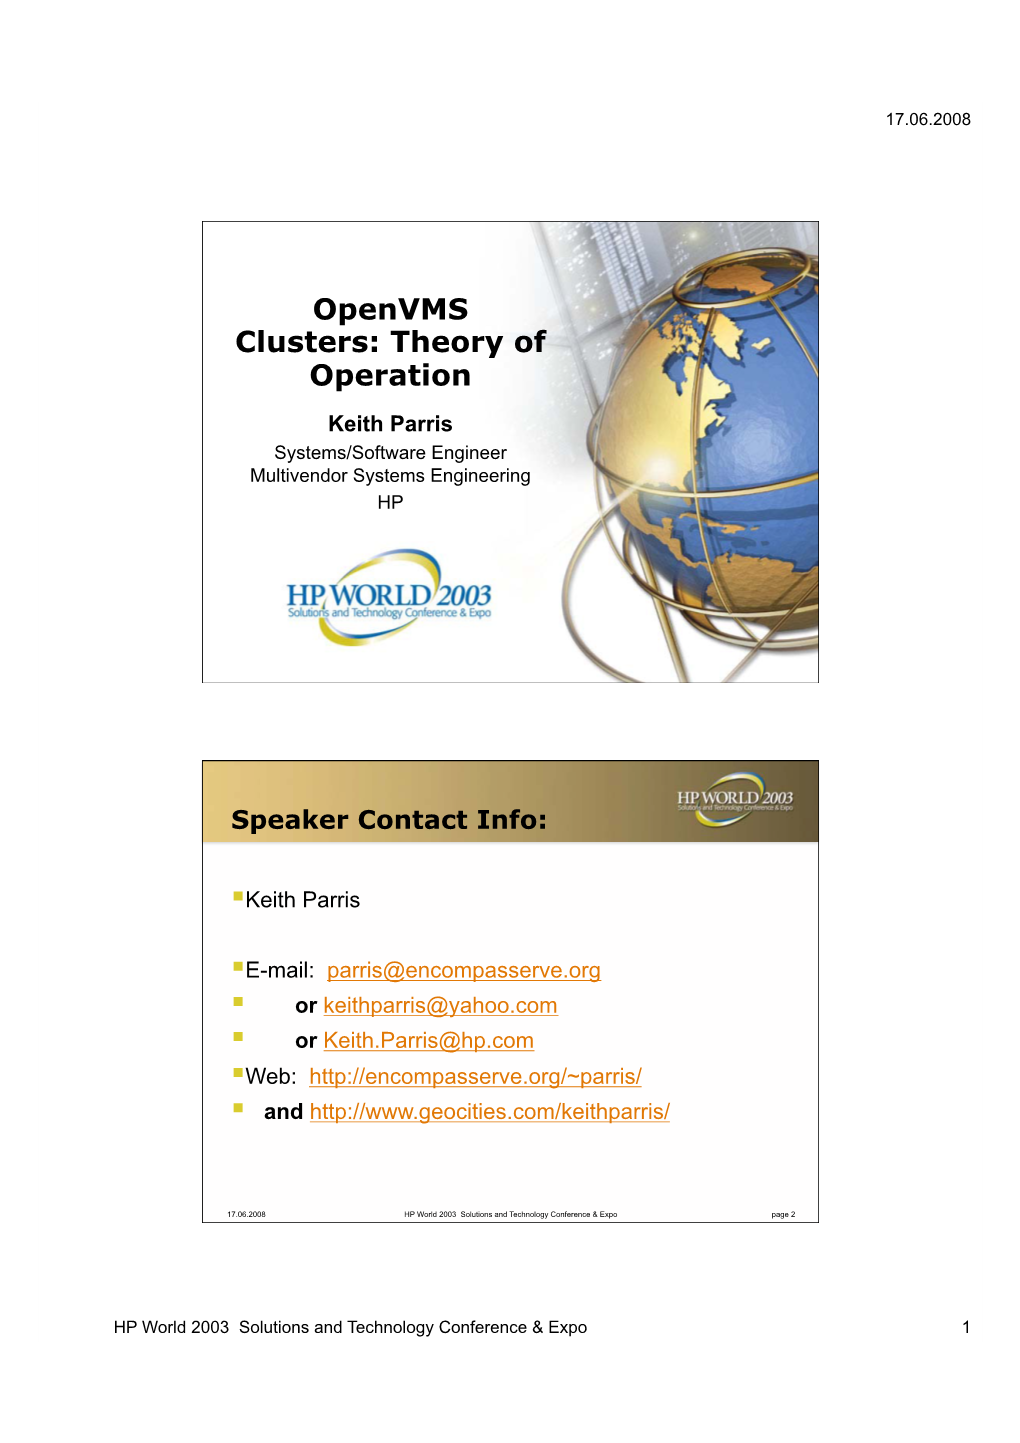 Openvms Clusters: Theory of Operation Keith Parris Systems/Software Engineer Multivendor Systems Engineering HP